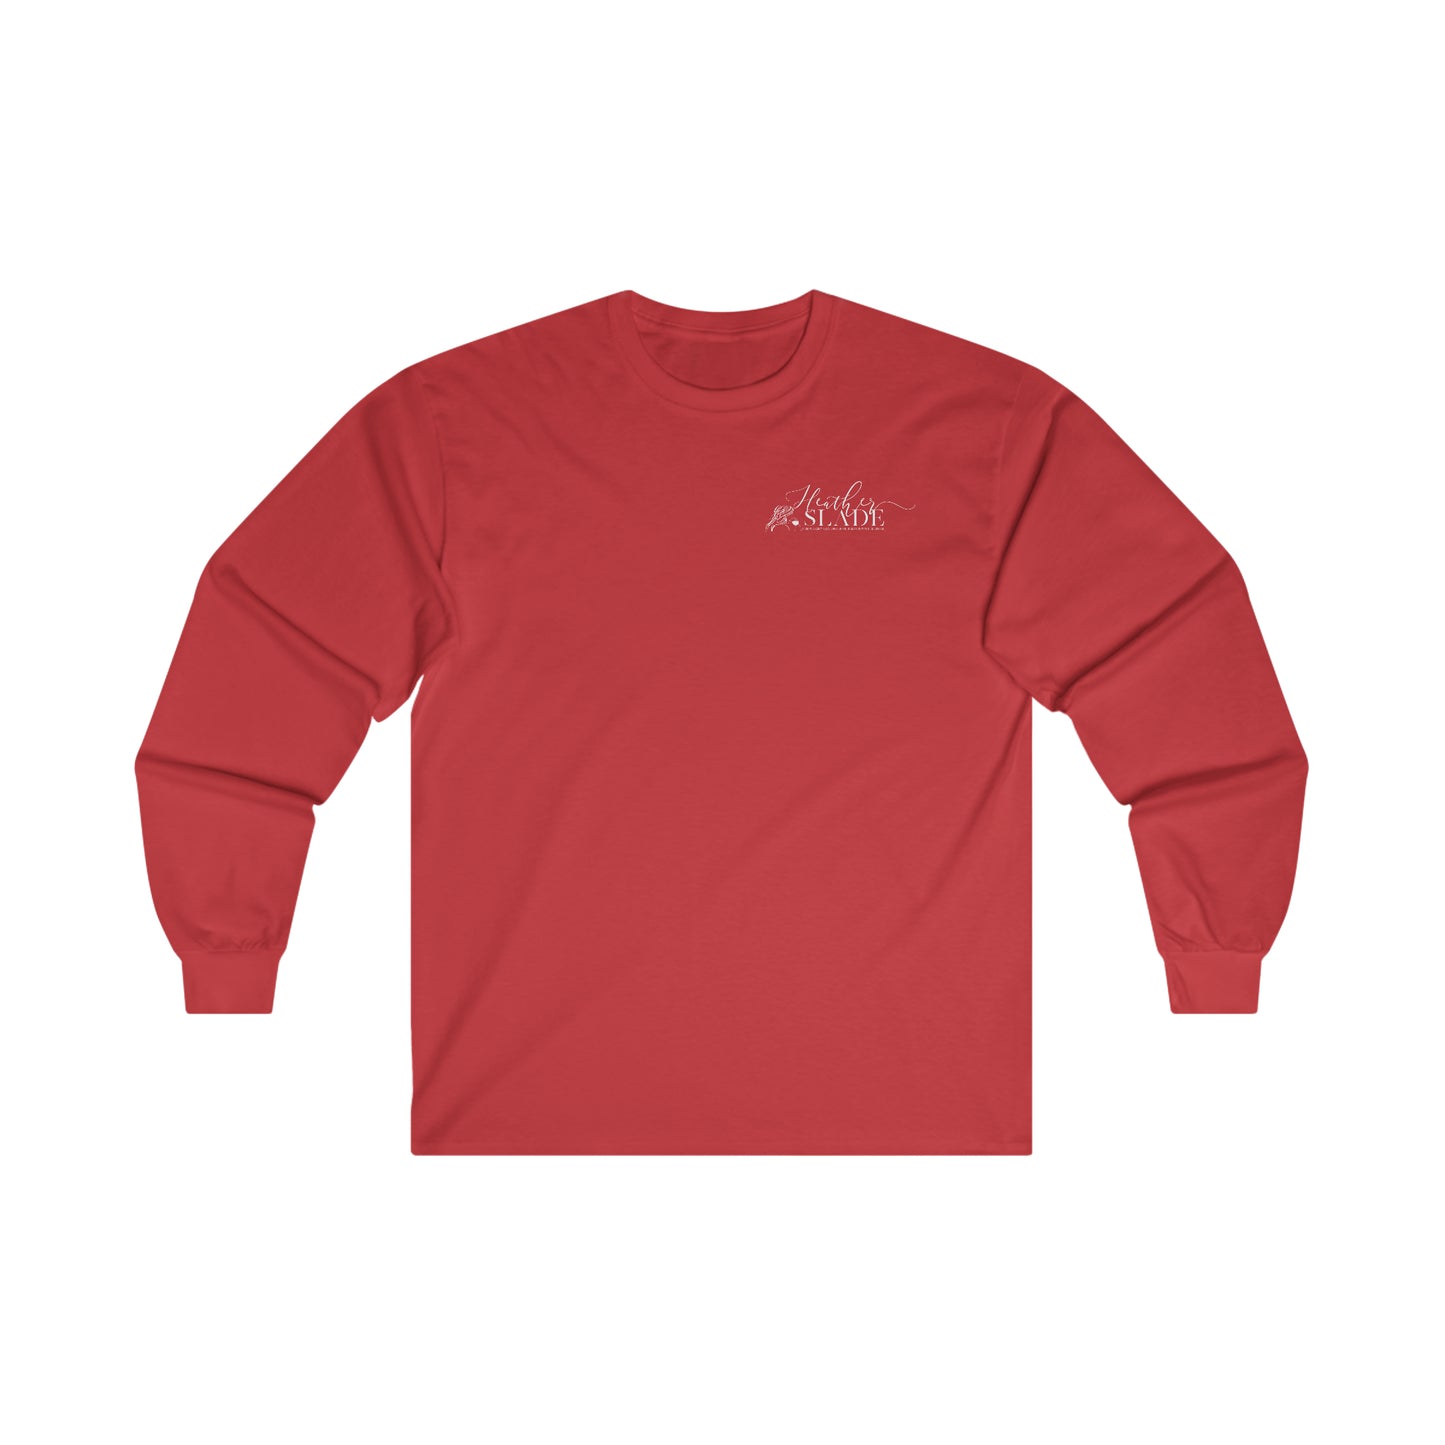 The Invincibles Team Two Ultra Cotton Long Sleeve Tee